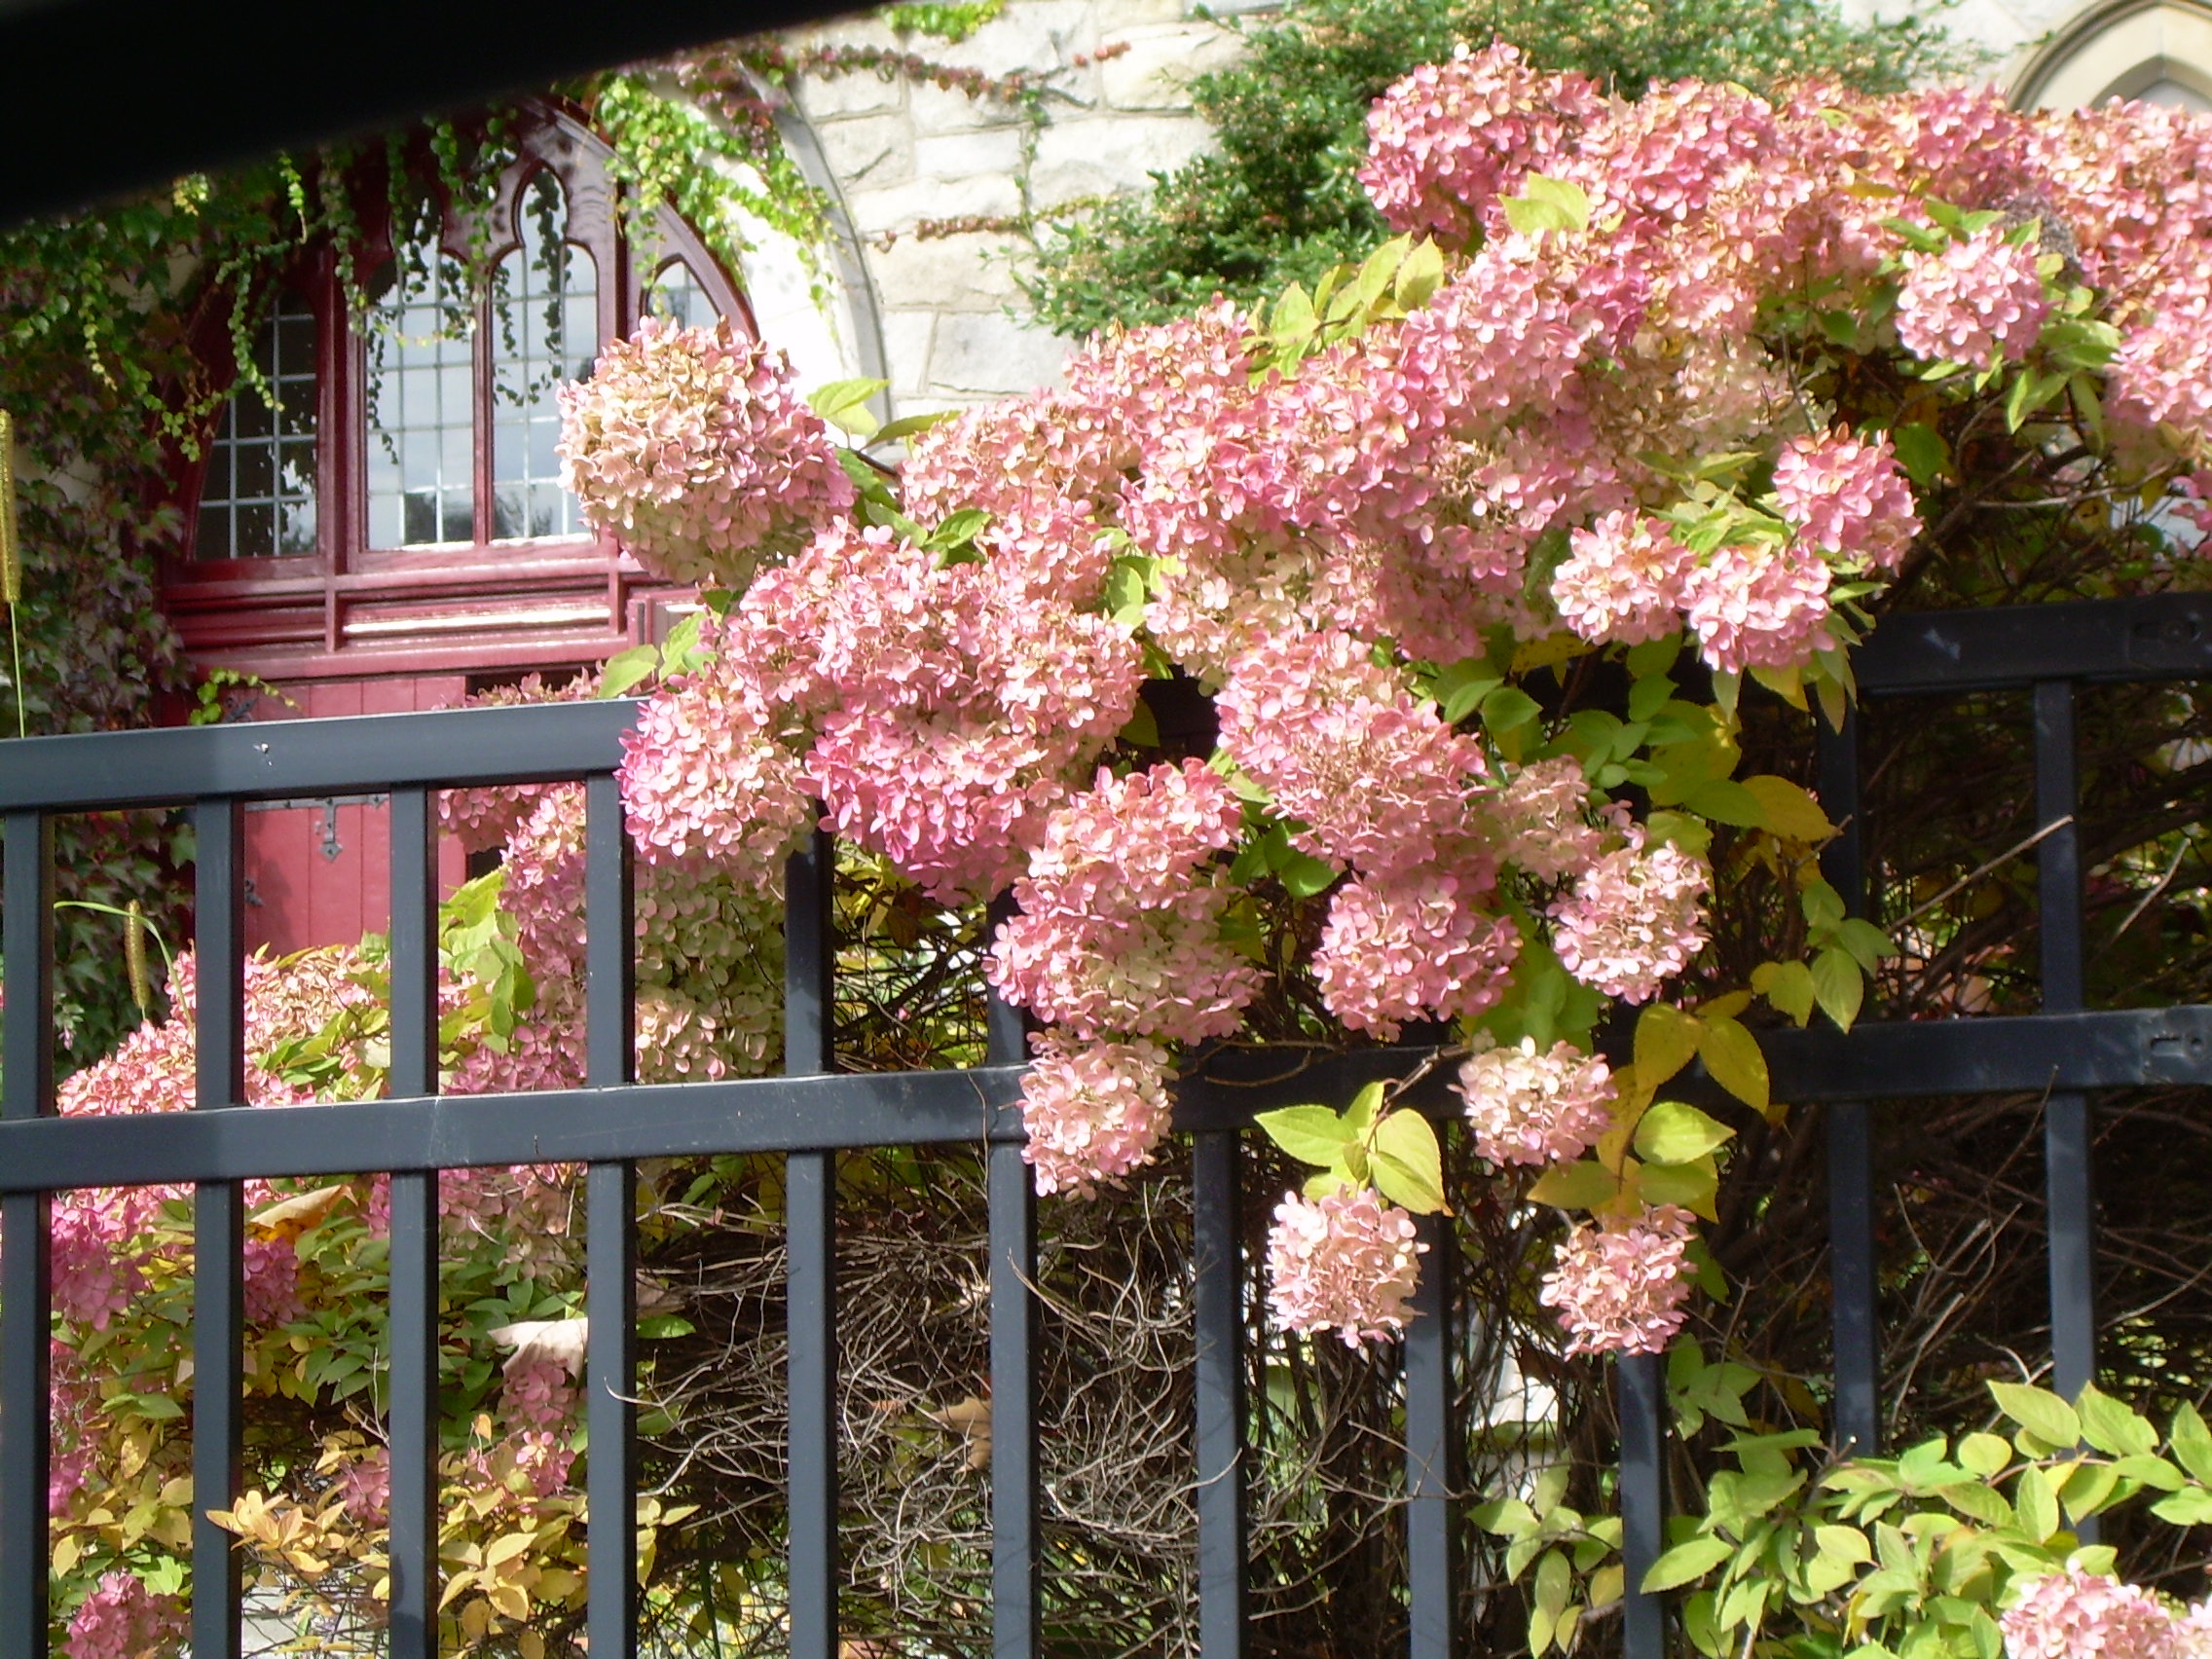 Fall Hydrangeas (user submitted)